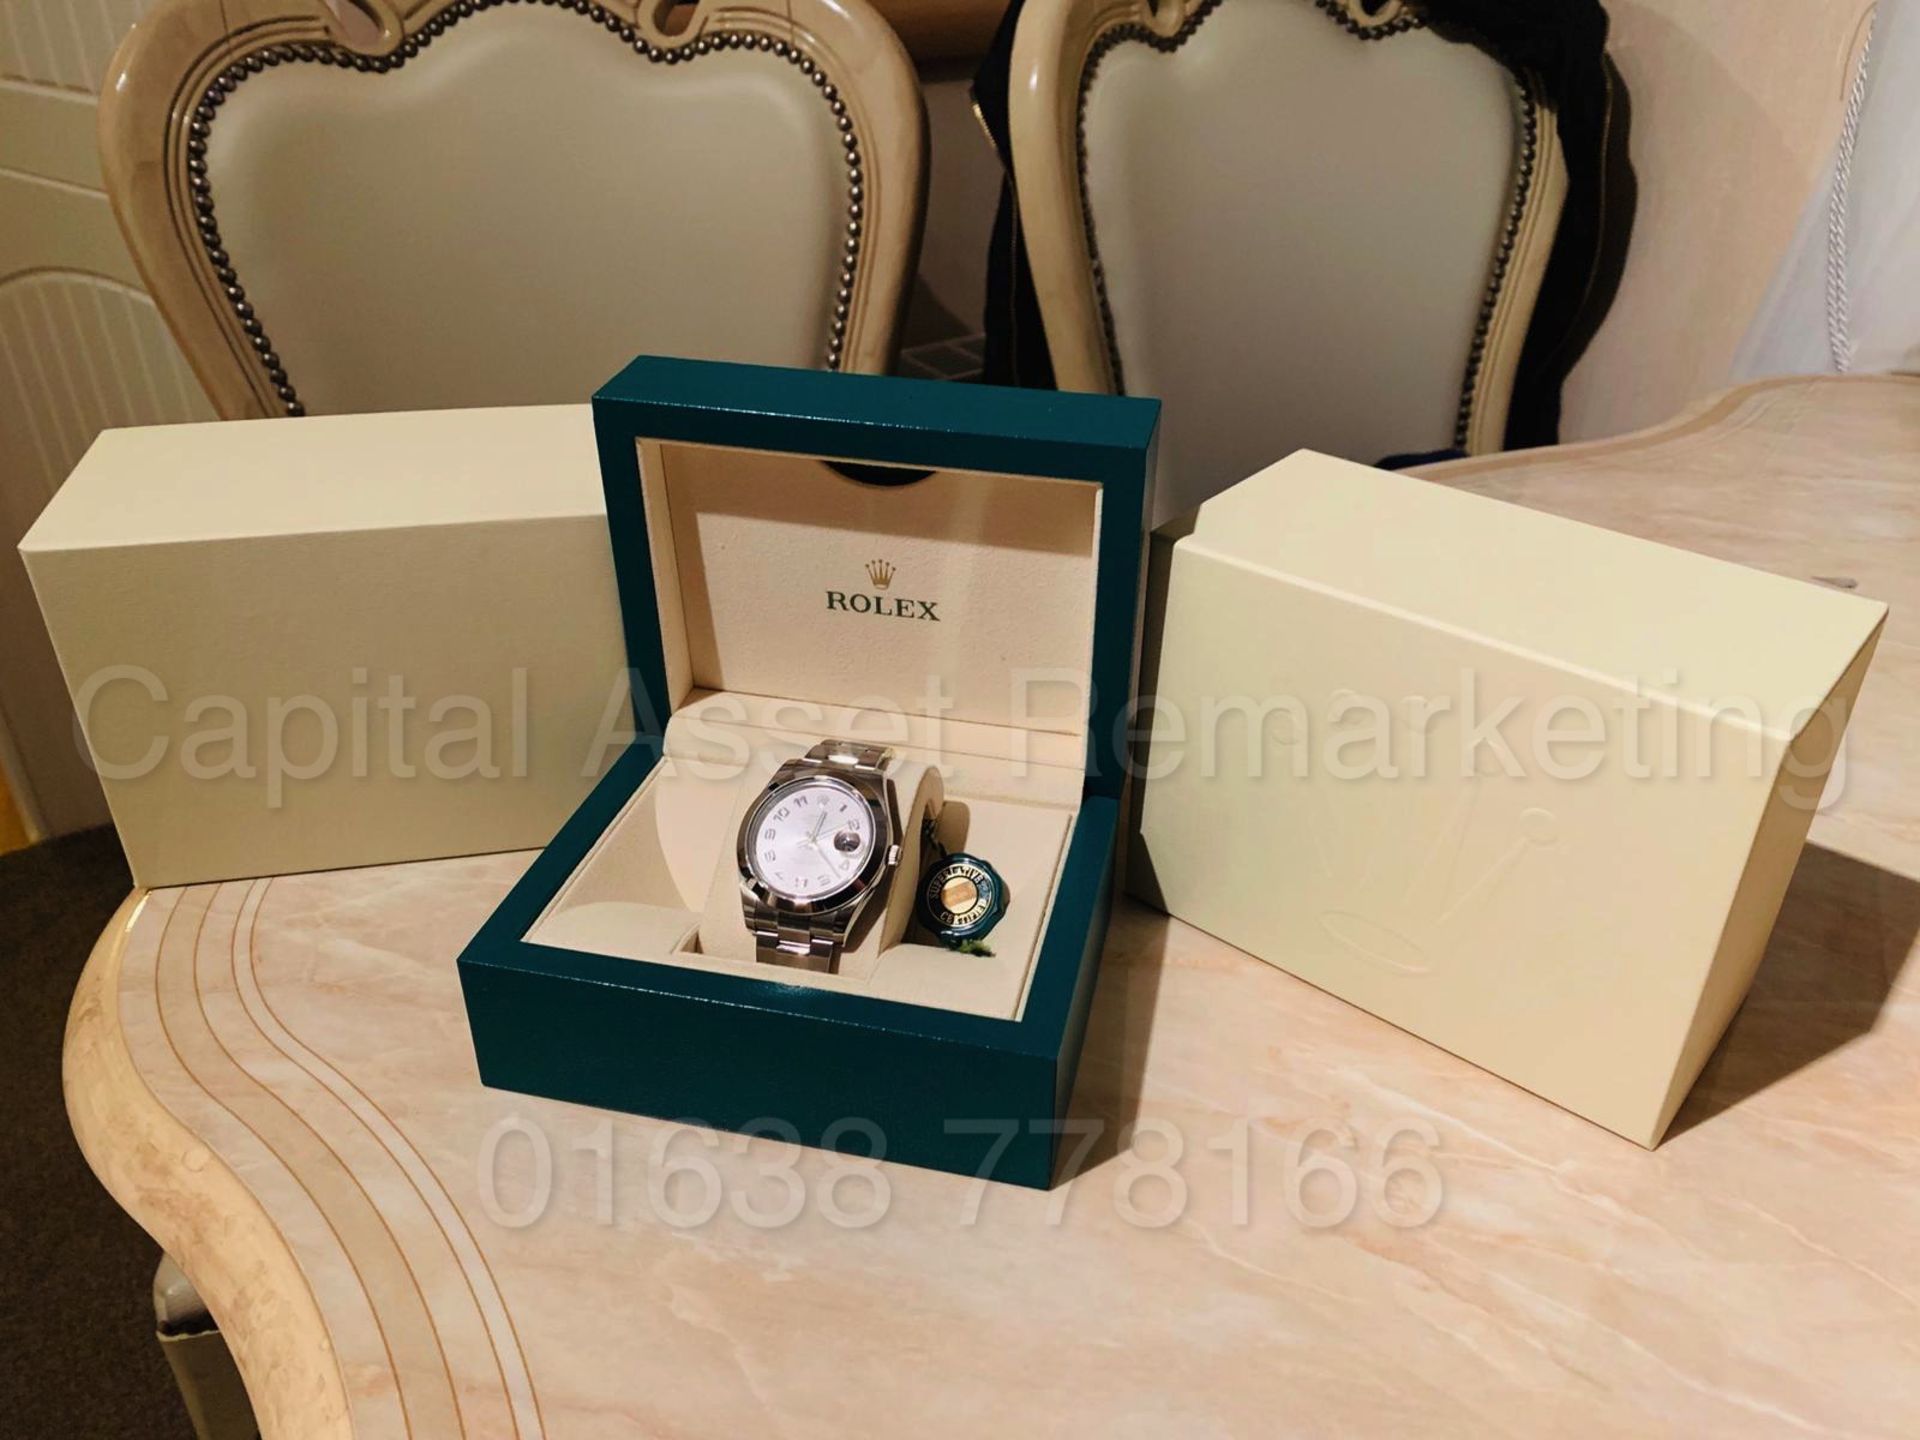 ROLEX OYSTER PERPETUAL *41MM DATEJUST* (BRAND NEW / UN-WORN) *GENUINE* (ALL PAPERWORK & BOX PRESENT) - Image 10 of 10